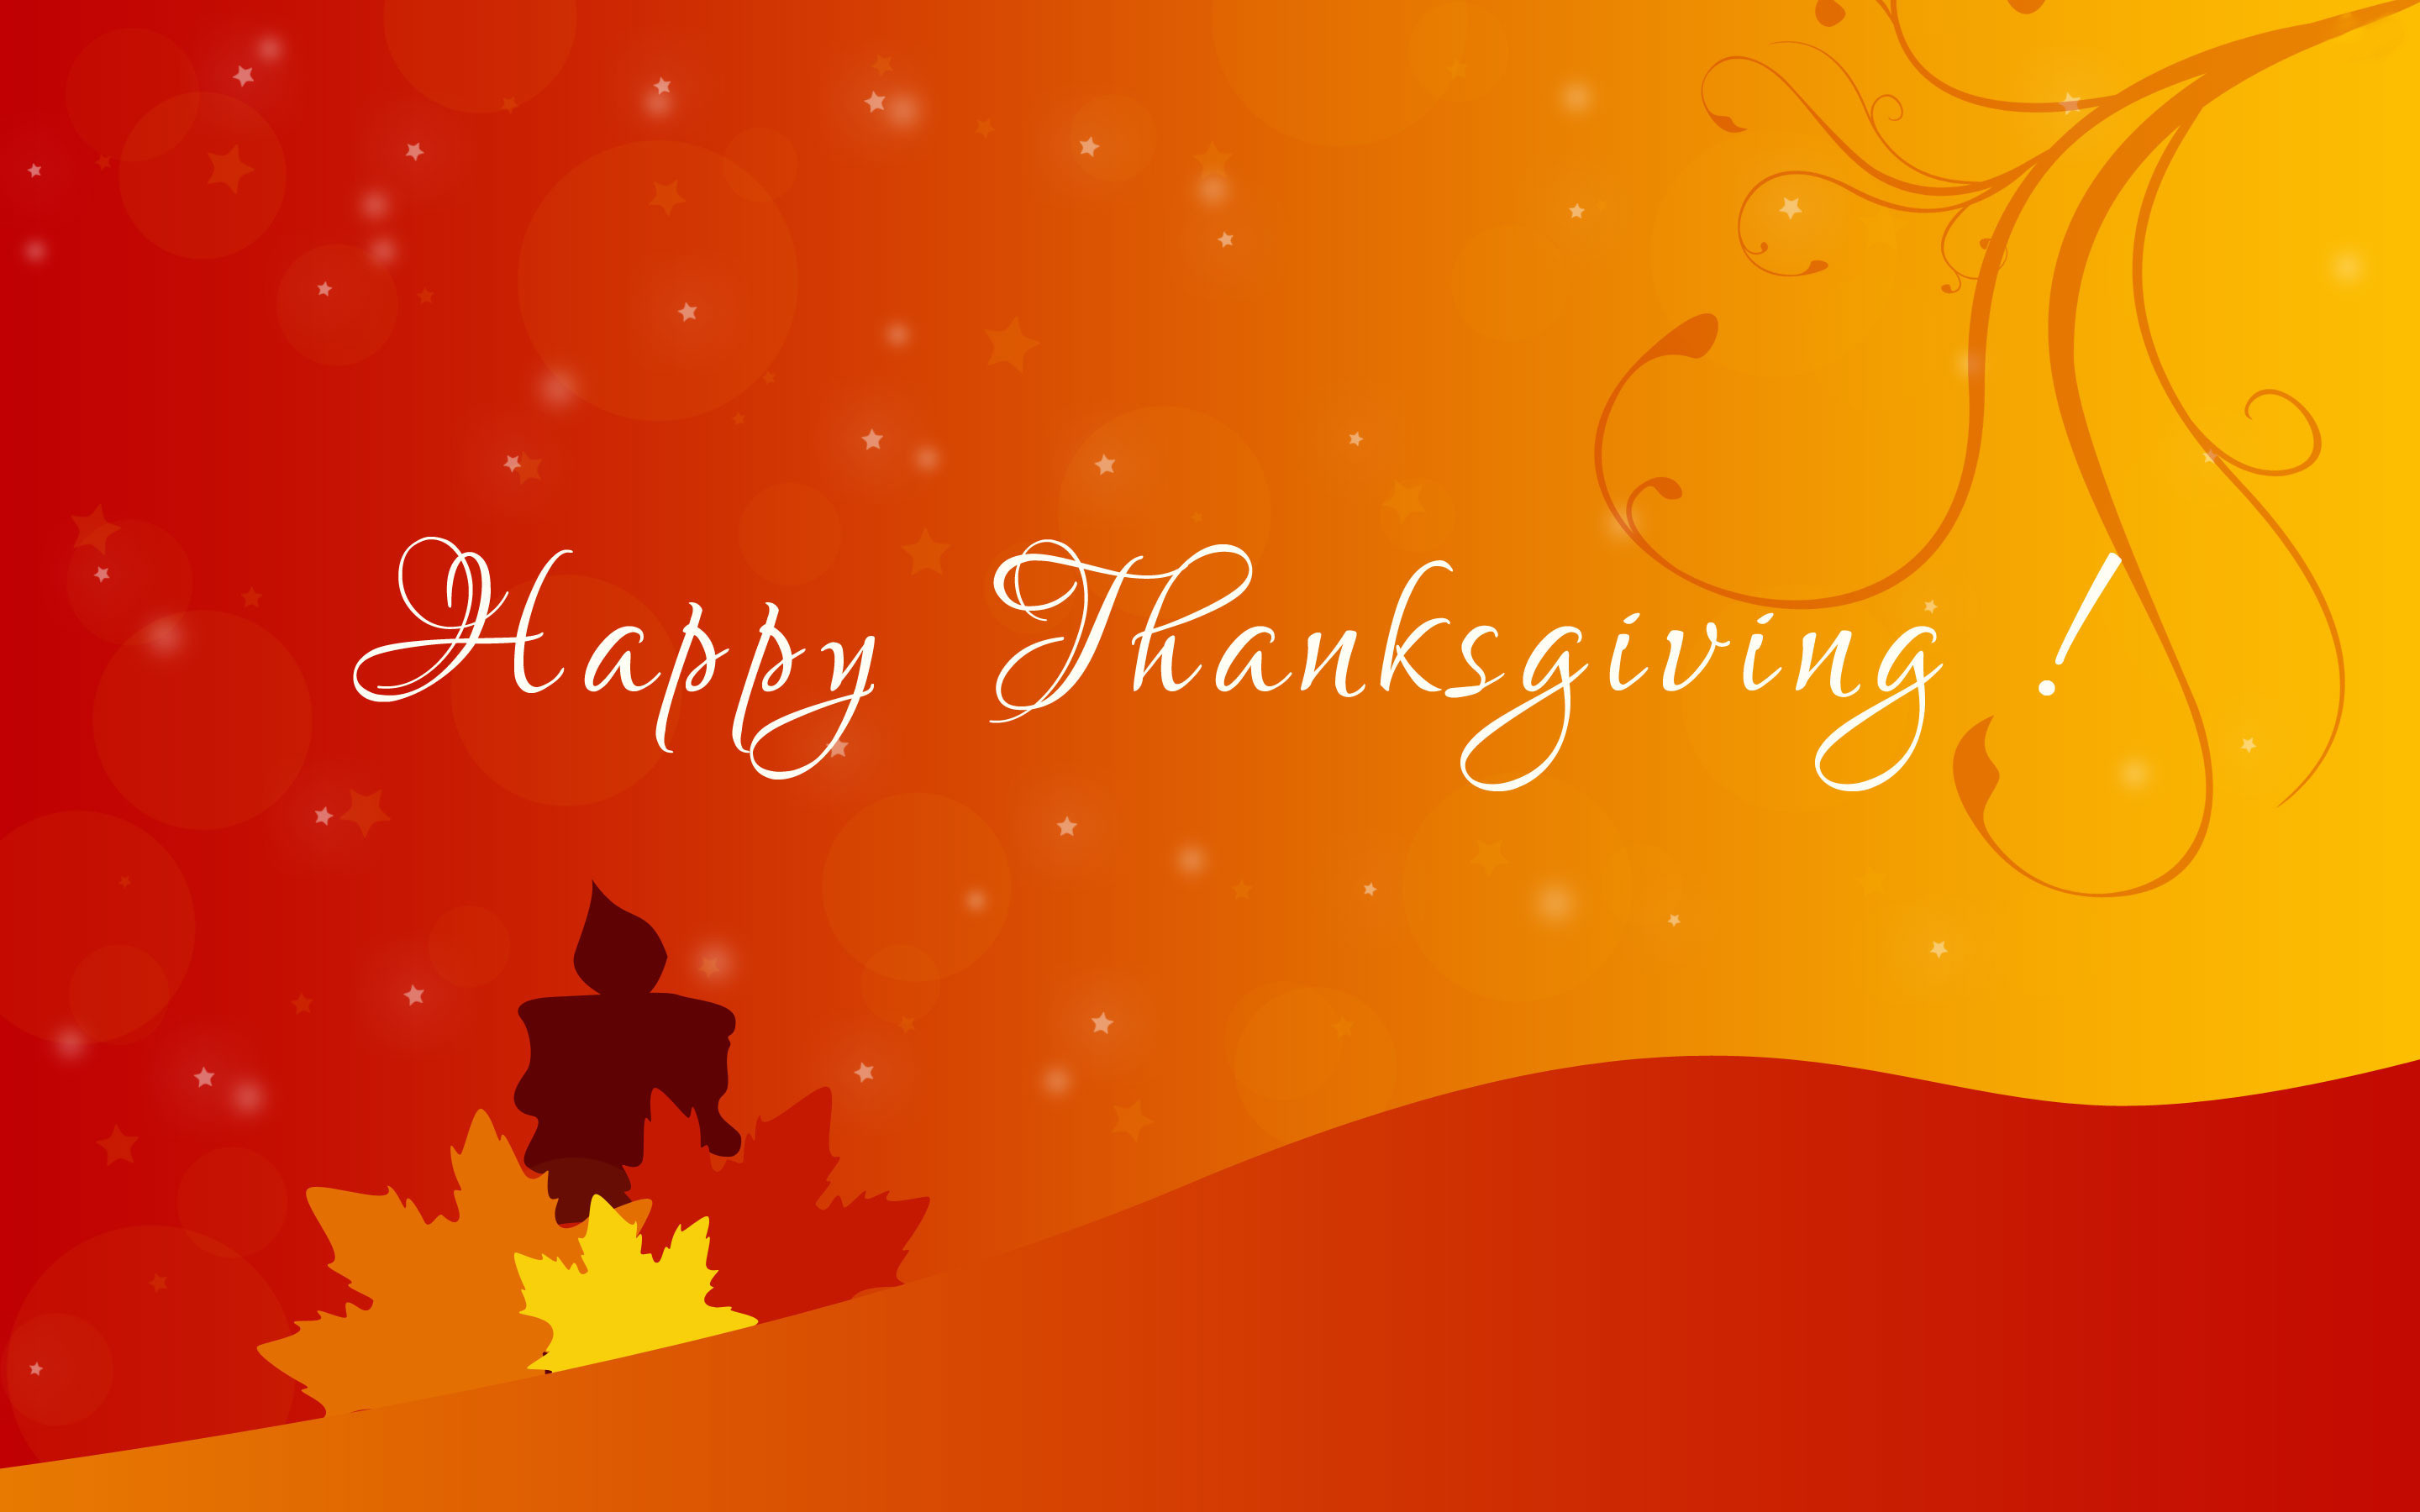 2880x1800 free thanksgiving wallpapers hd download for desktop full hd download high  definiton wallpapers colourful 4k free download wallpapers colours artwork  ...